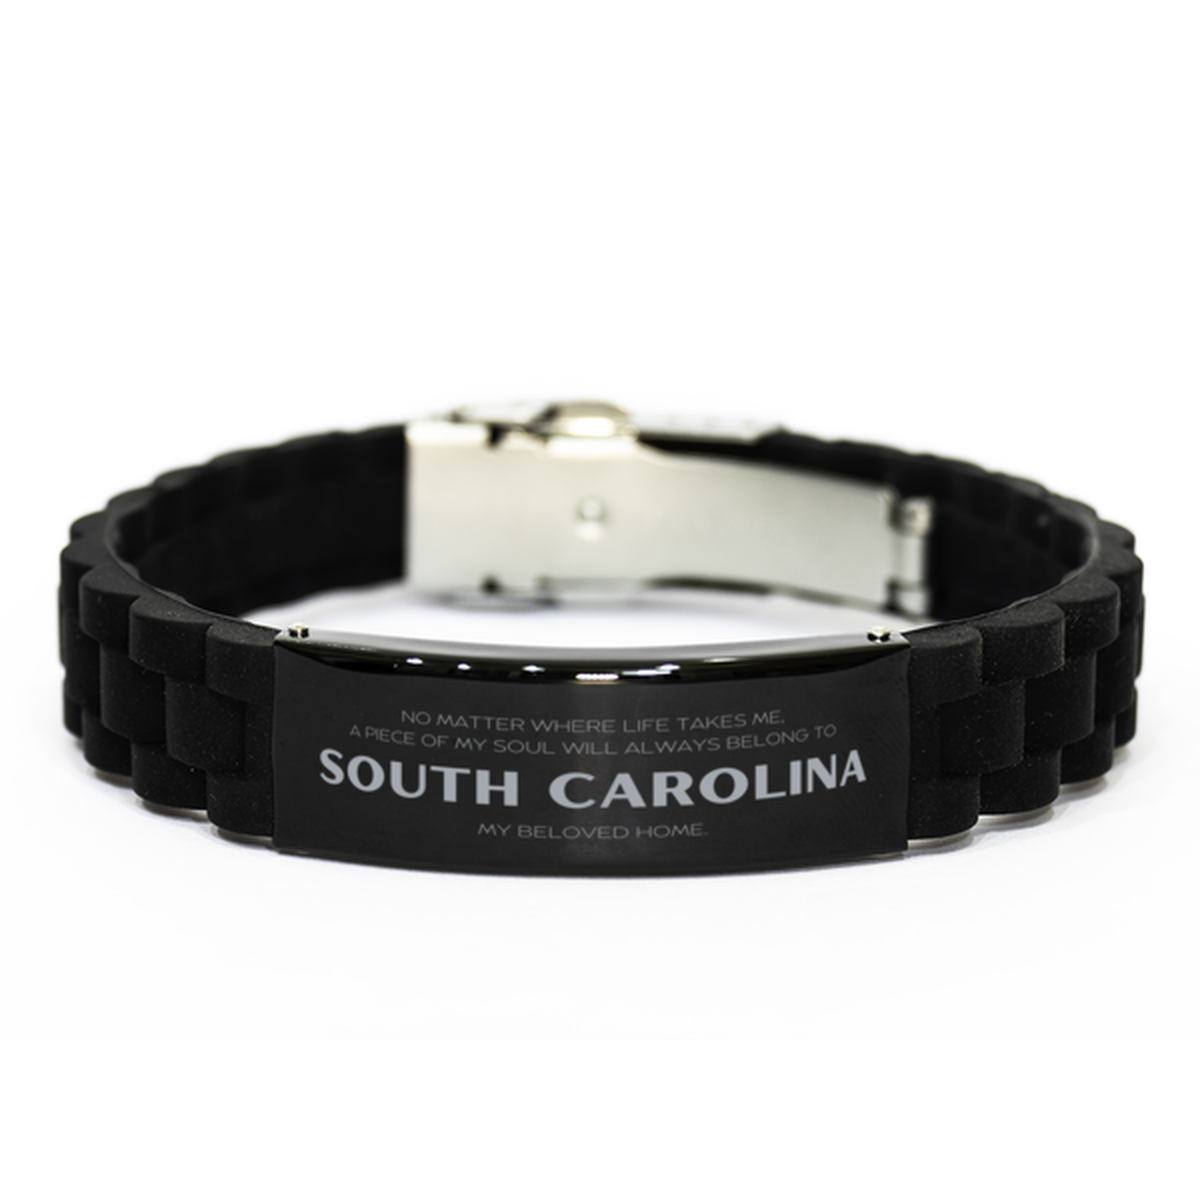 Love South Carolina State Gifts, My soul will always belong to South Carolina, Proud Black Glidelock Clasp Bracelet, Birthday Unique Gifts For South Carolina Men, Women, Friends